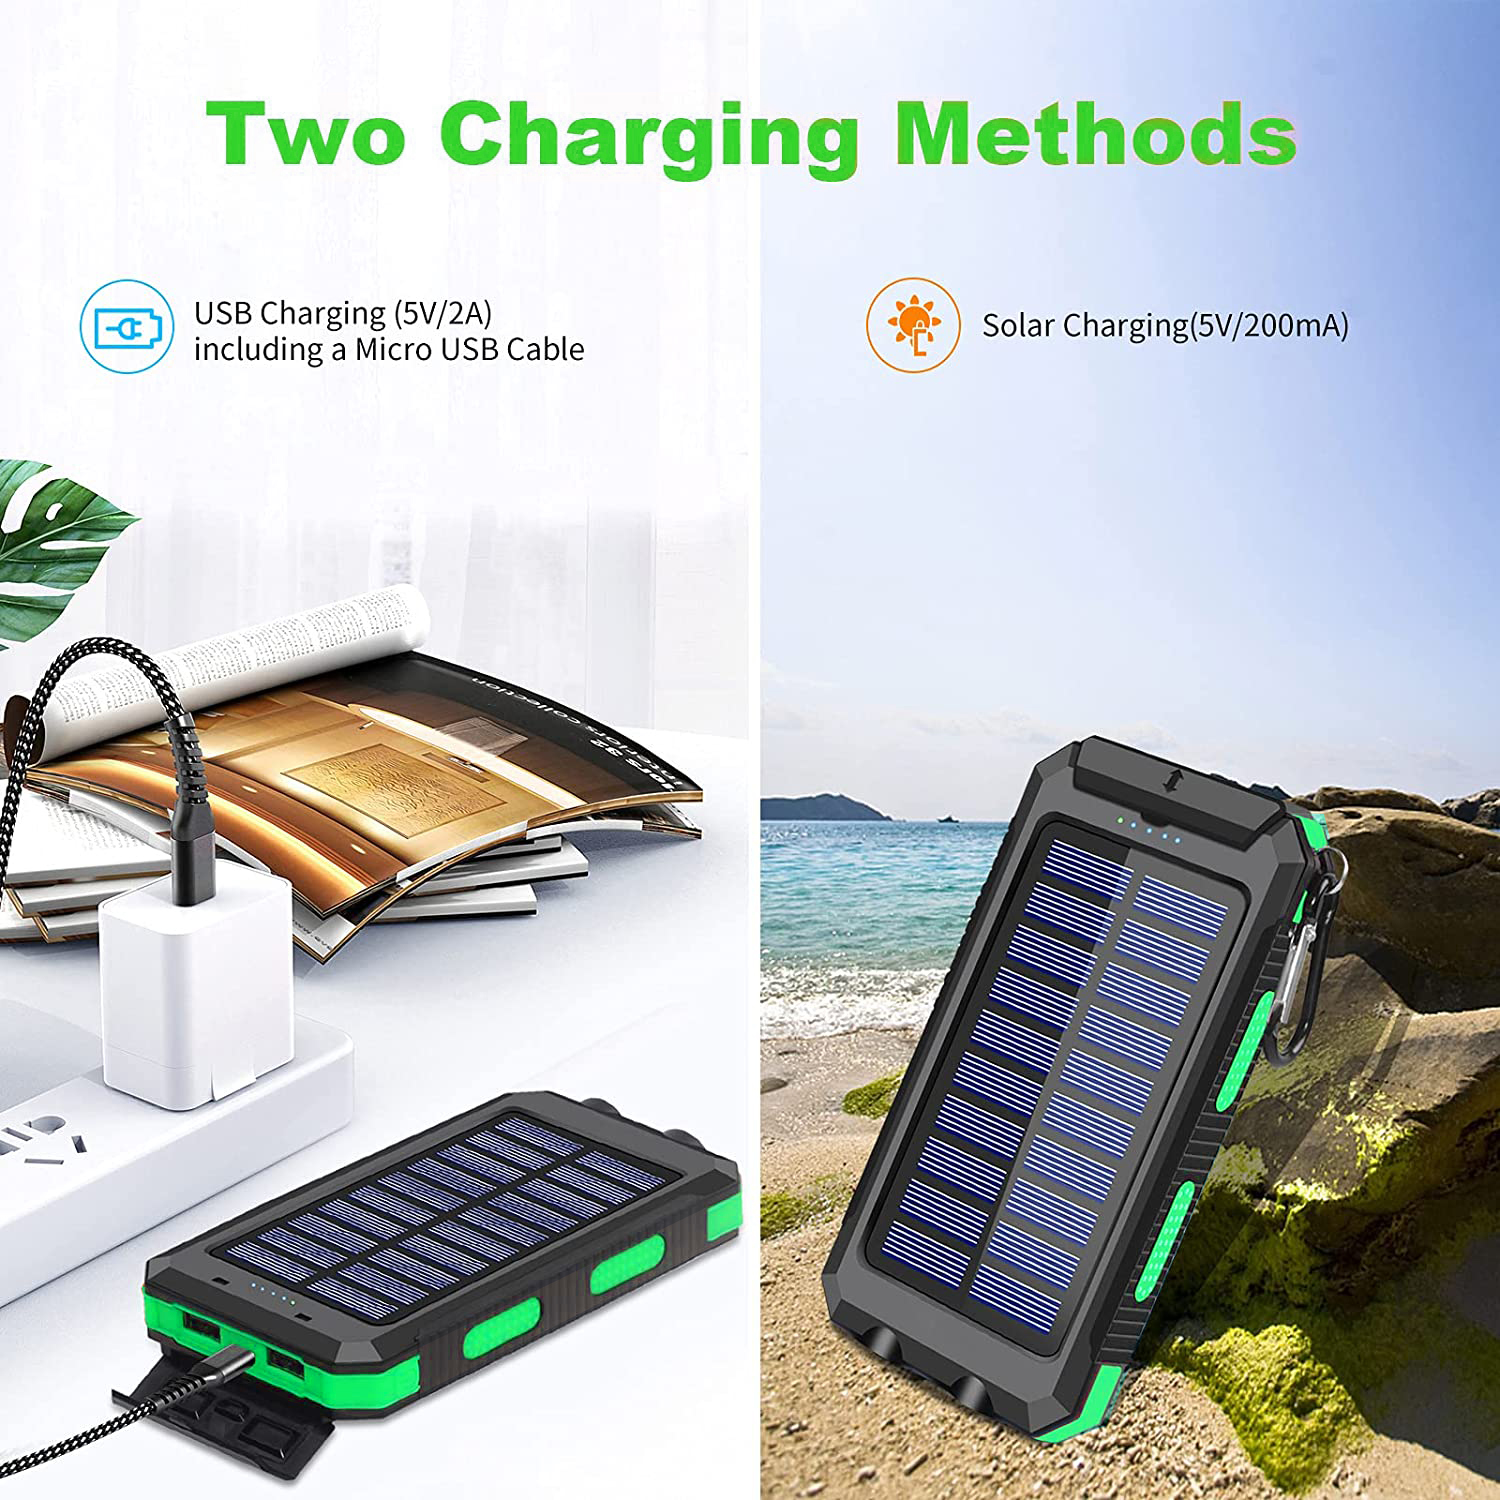 20000mAh Solar Charger for Cell Phone iphone, Portable Solar Power Bank with Dual 5V USB Ports, 2 Led Light Flashlight, Compass Battery Pack for Outdoor Camping Hiking(Green) - image 4 of 7